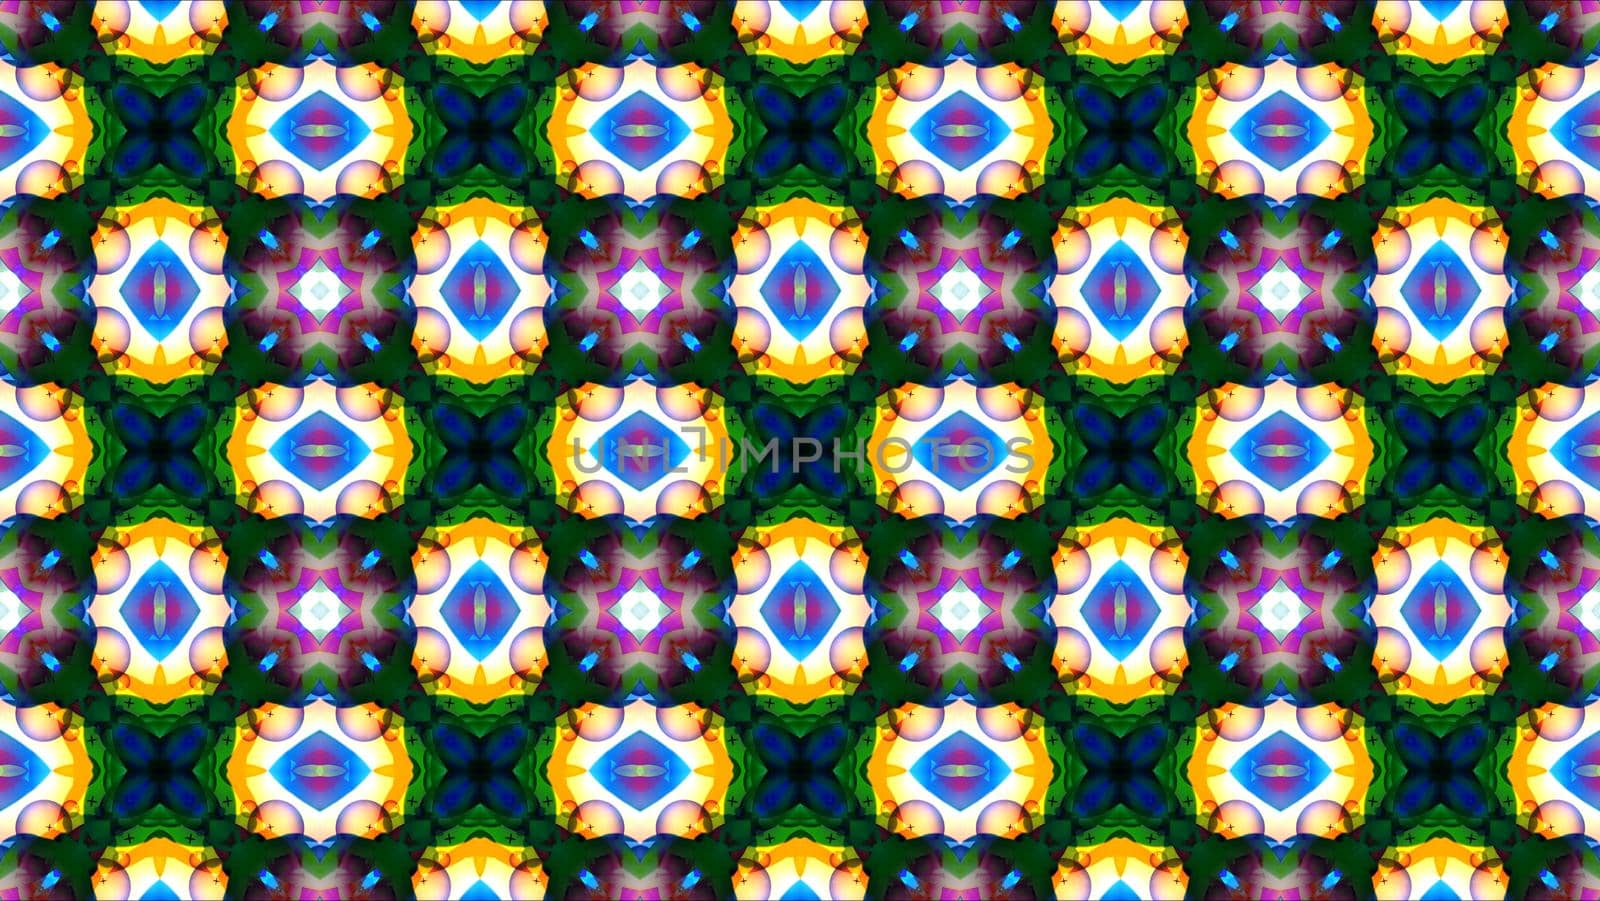 Dragonflies blue crystal on head feed on nectar from green flower pollen kaleidoscope reflection texture pattern background